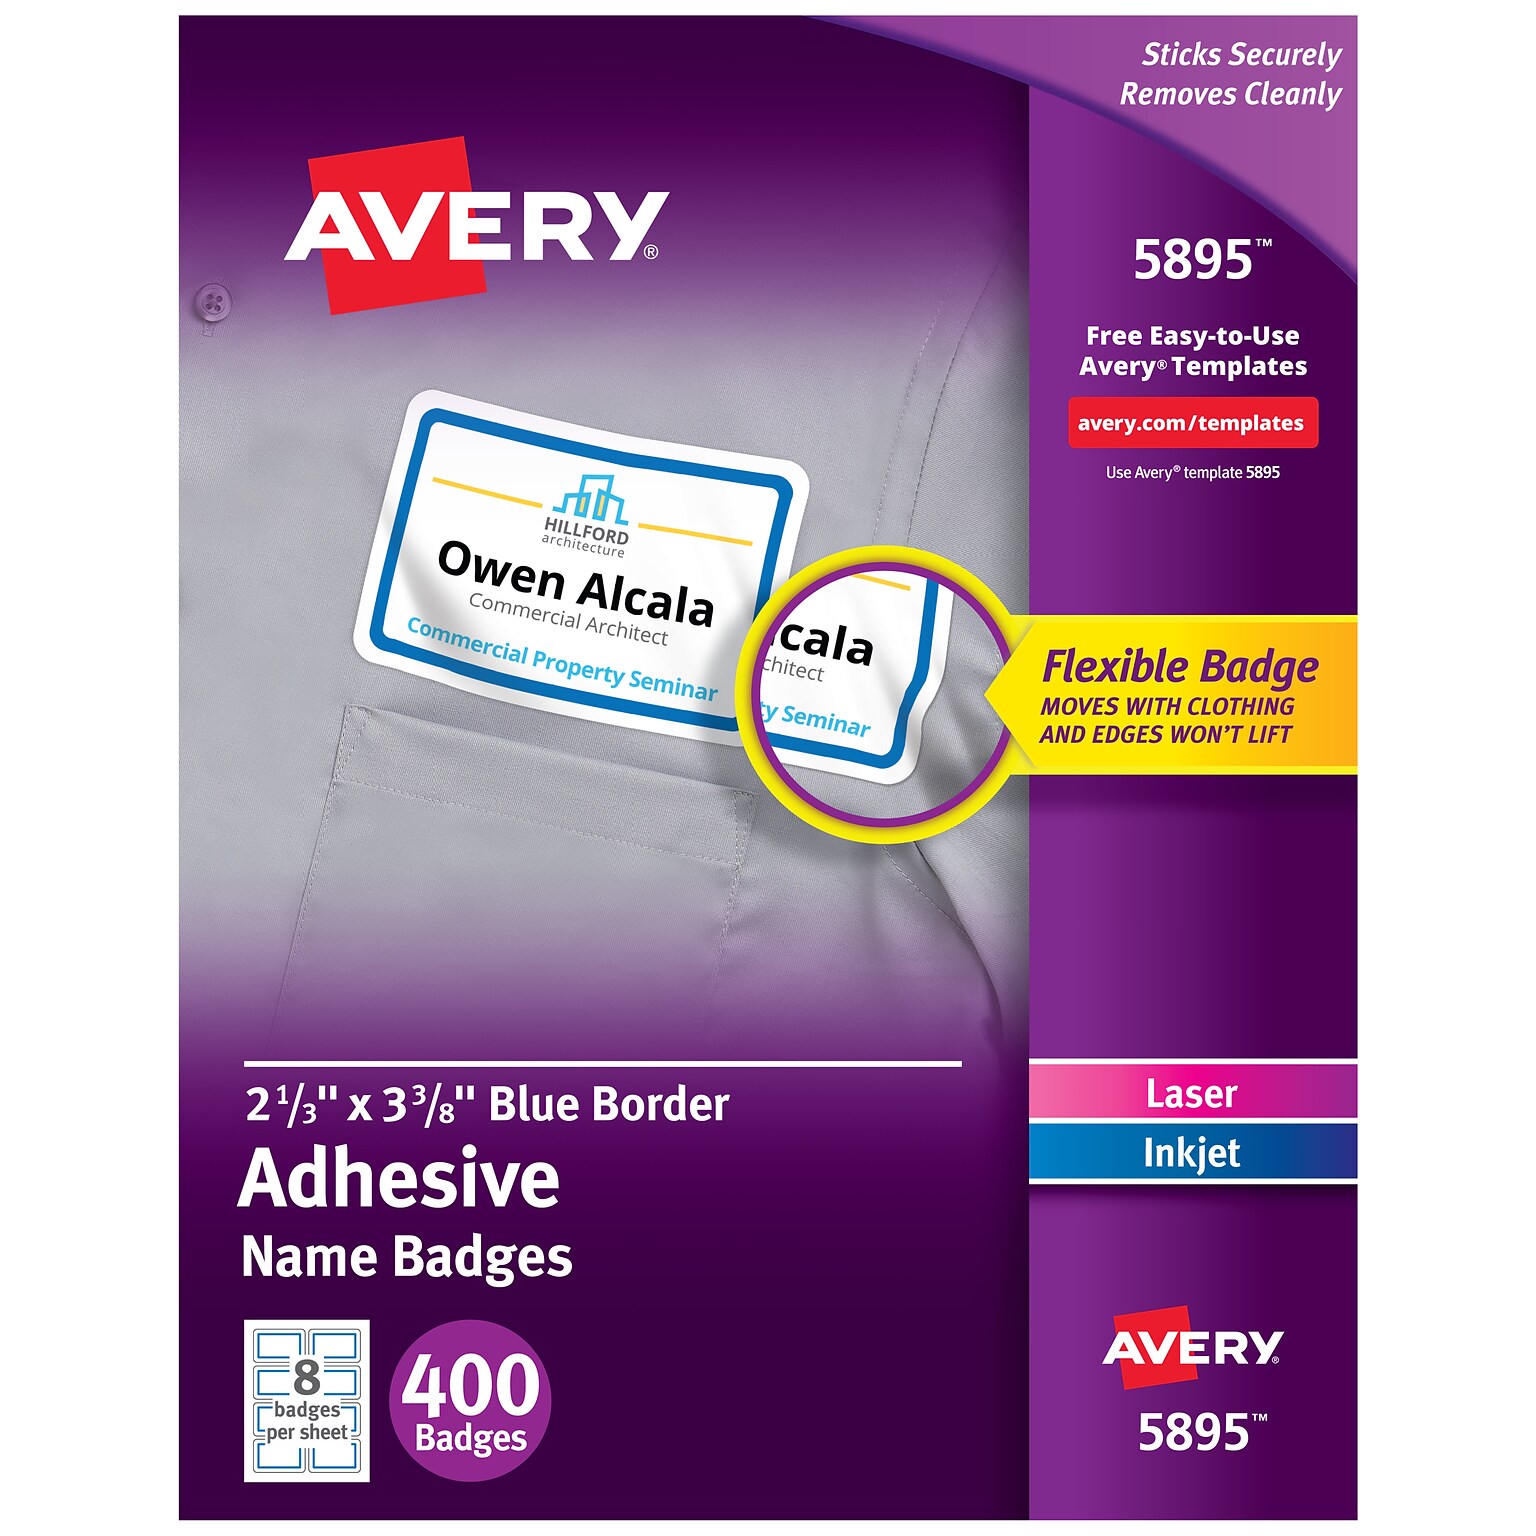 Avery Flexible Laser/Inkjet Name Badge Labels, 2 1/3 x 3 3/8, White with Blue Border, 400 Labels Per Pack (5895)